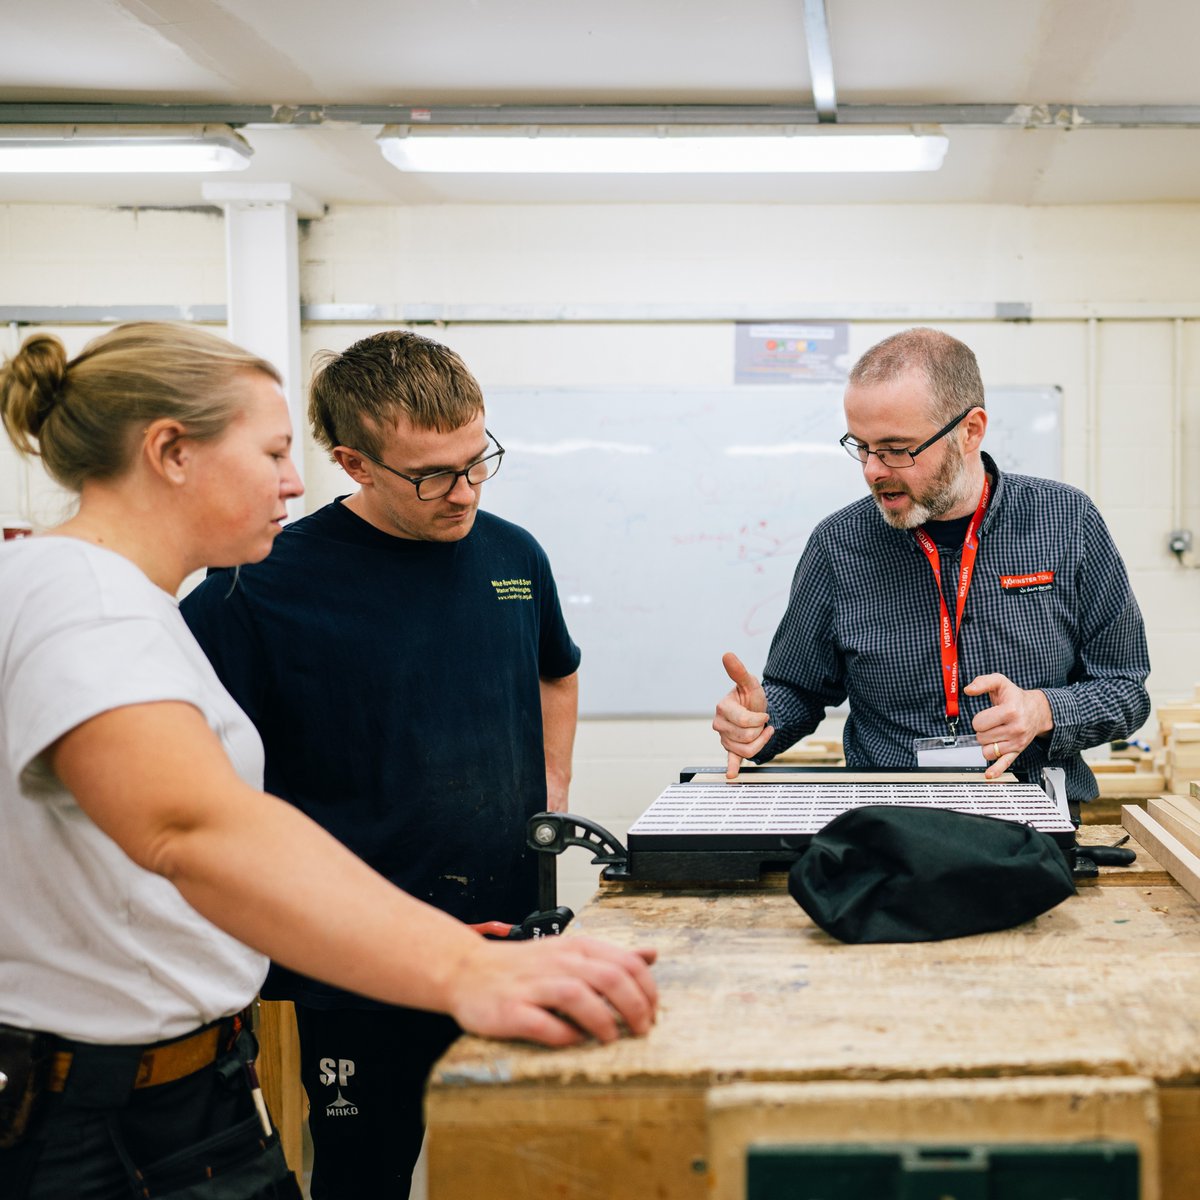 Yesterday our busy Construction Centre enjoyed a visit from @AxminsterTools to demo a new handheld CNC router for our apprentices and full-time learners. #ExeCollProud | #ConstructionCareers